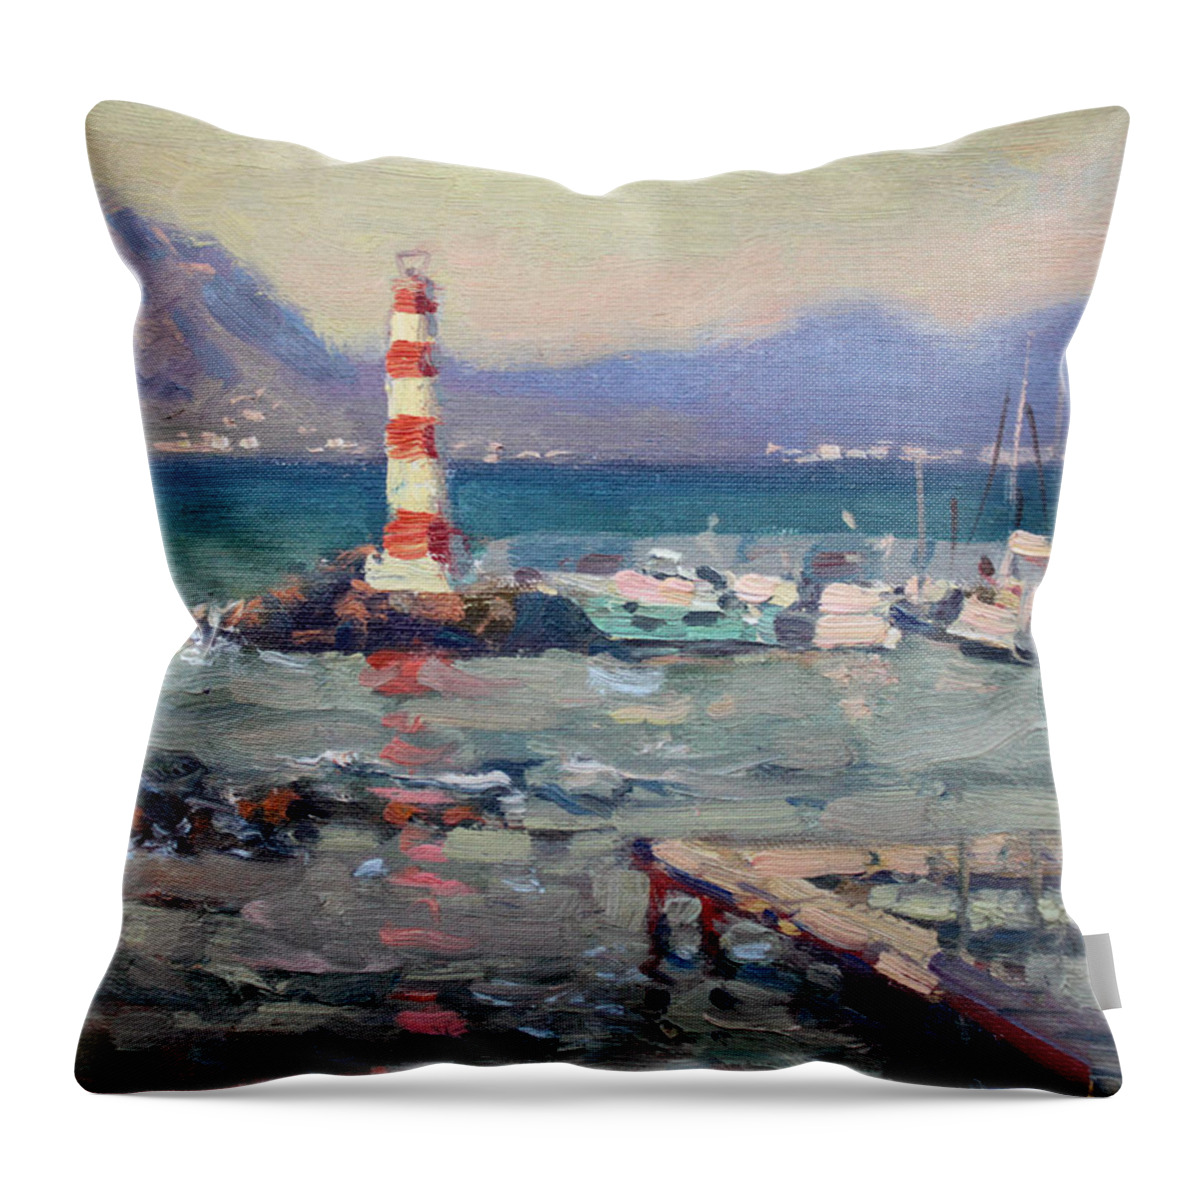 Lighthouse Throw Pillow featuring the painting Lighthouse at Dilesi Harbor Greece by Ylli Haruni